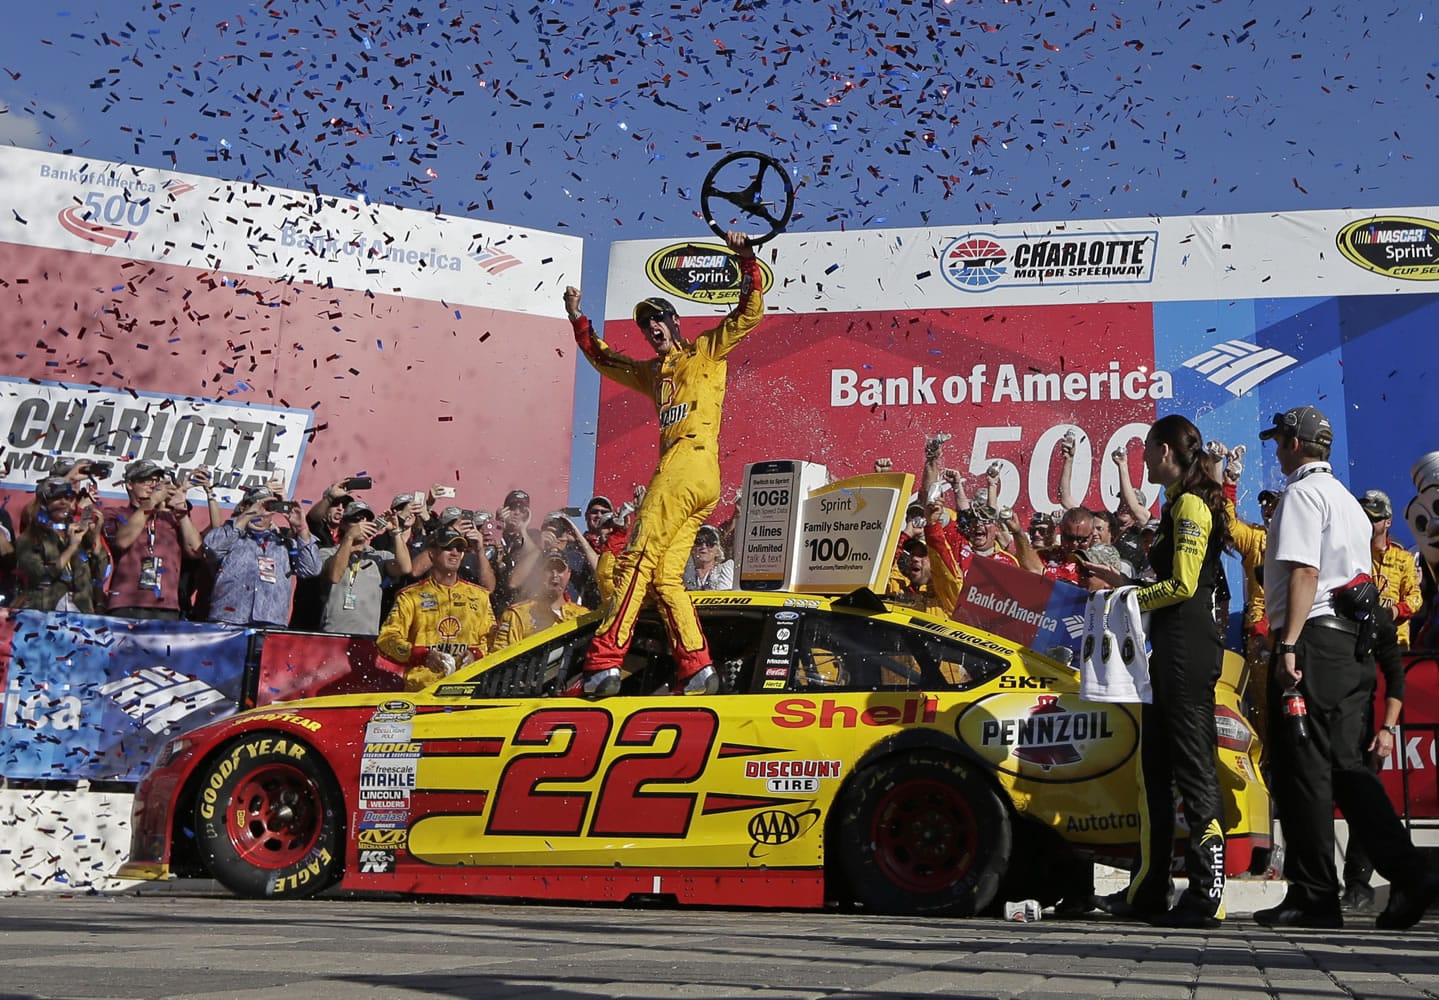 Joey Logano celebrates in Victory Lane after winning the NASCAR Sprint Cup race at Charlotte Motor Speedway in Concord, N.C., Sunday, Oct. 11, 2015.